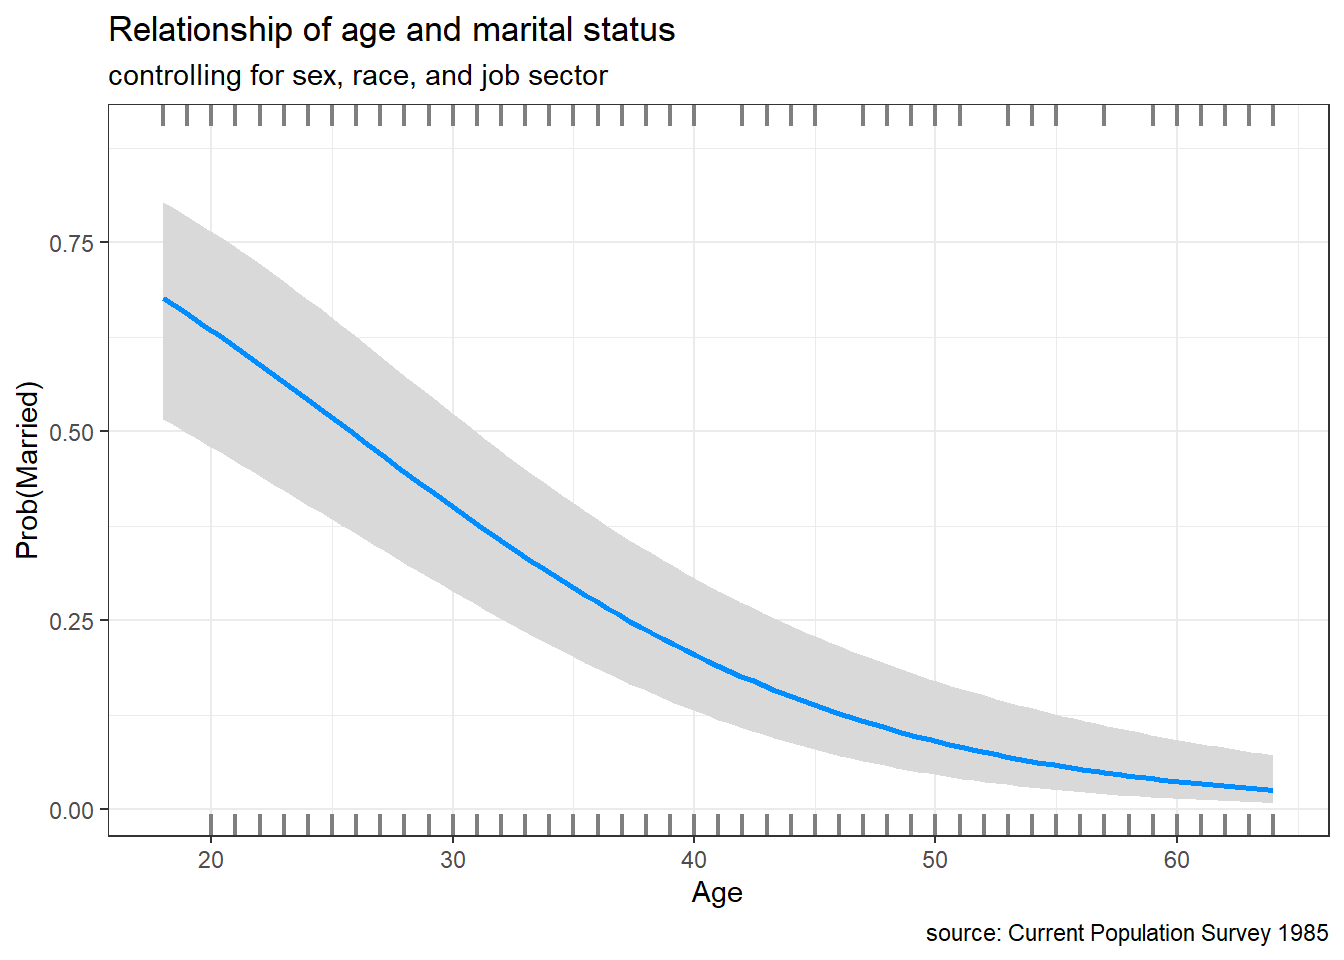 Conditional plot of age and marital status